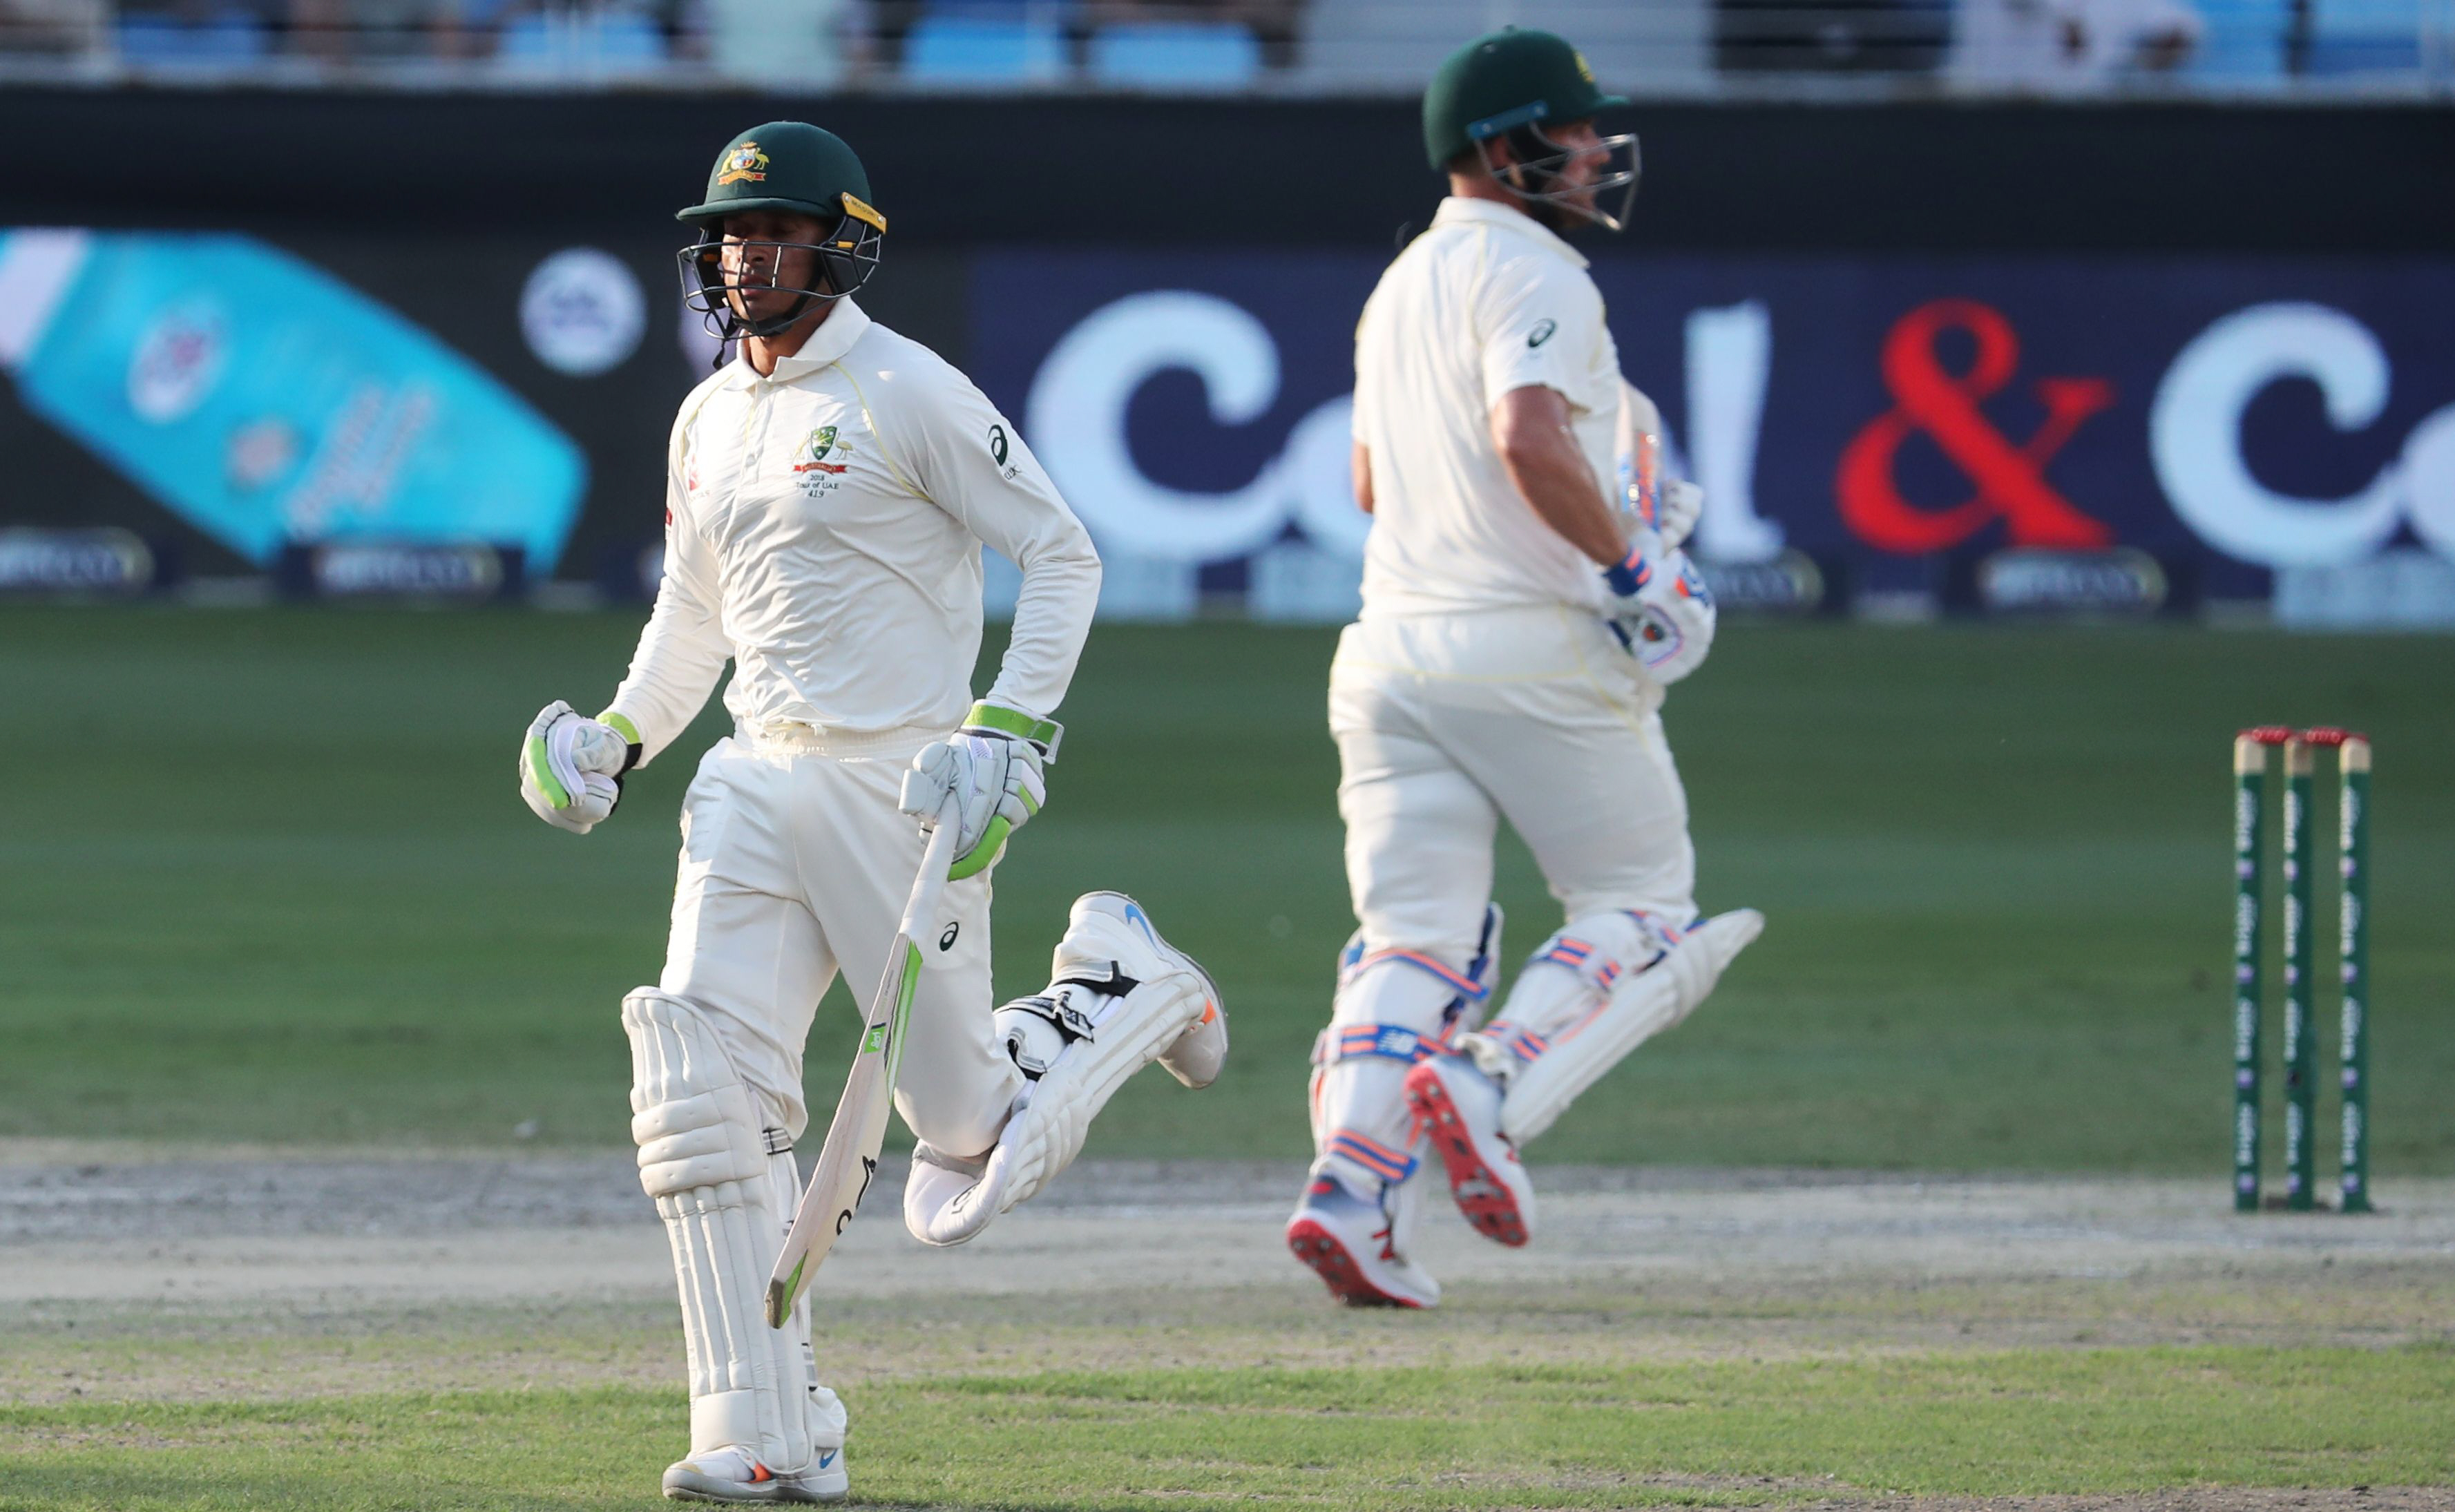 1.	Australian cricketers Usman Khawaja (L) and Aaron Finch (R) run between the wickets during the second day of the First Test match in the series between Australia and Pakistan at the Dubai International Stadium in Dubai on October 8, 2018. (Photo by KAR